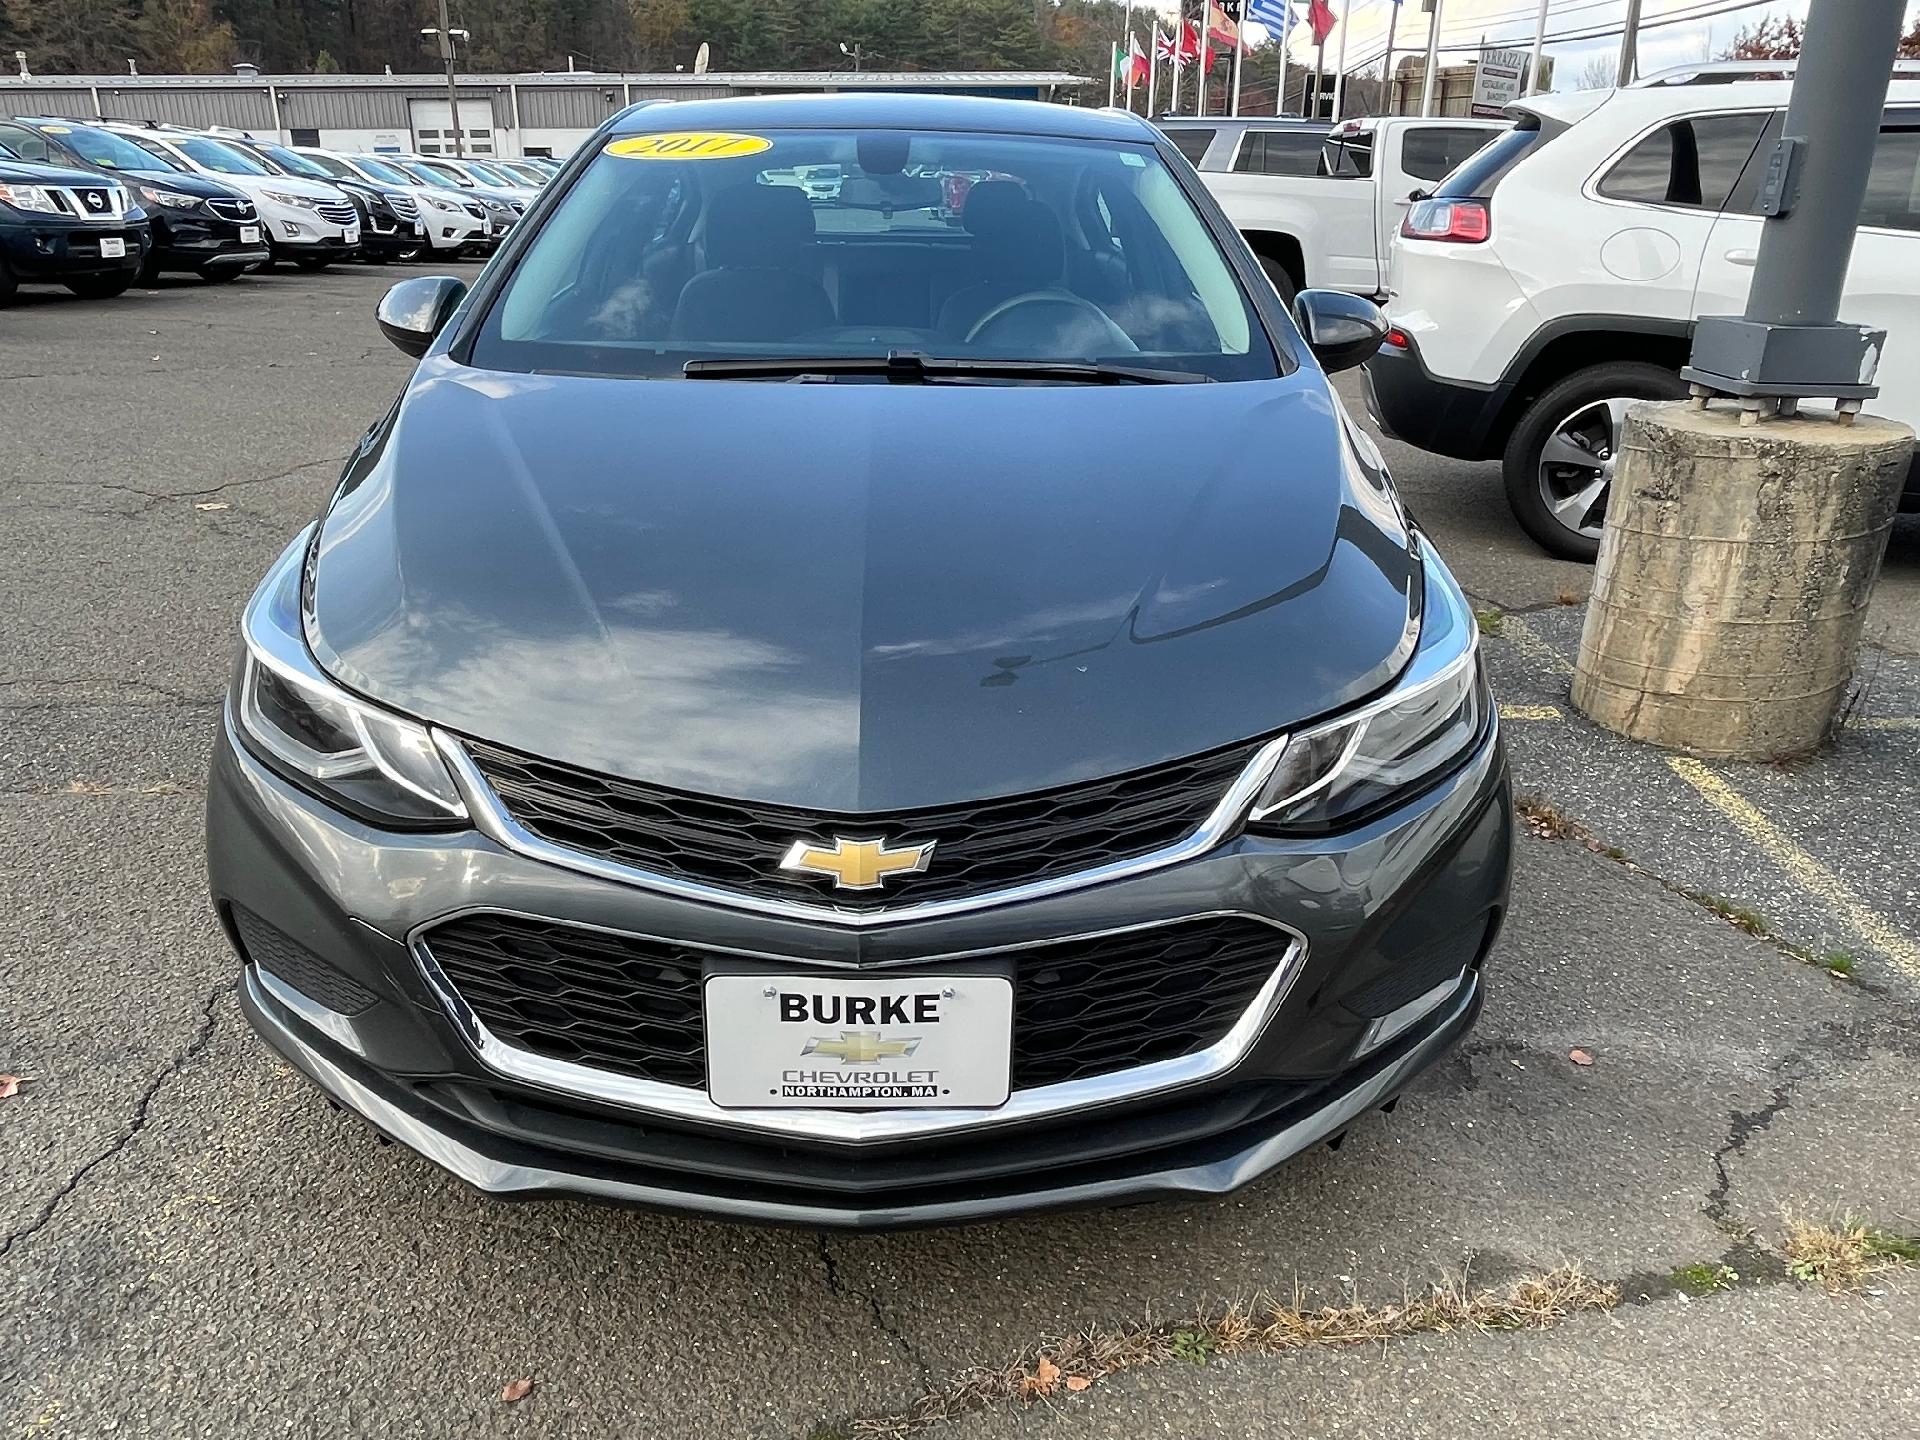 Used 2017 Chevrolet Cruze LT with VIN 3G1BE6SM7HS581698 for sale in Northampton, MA